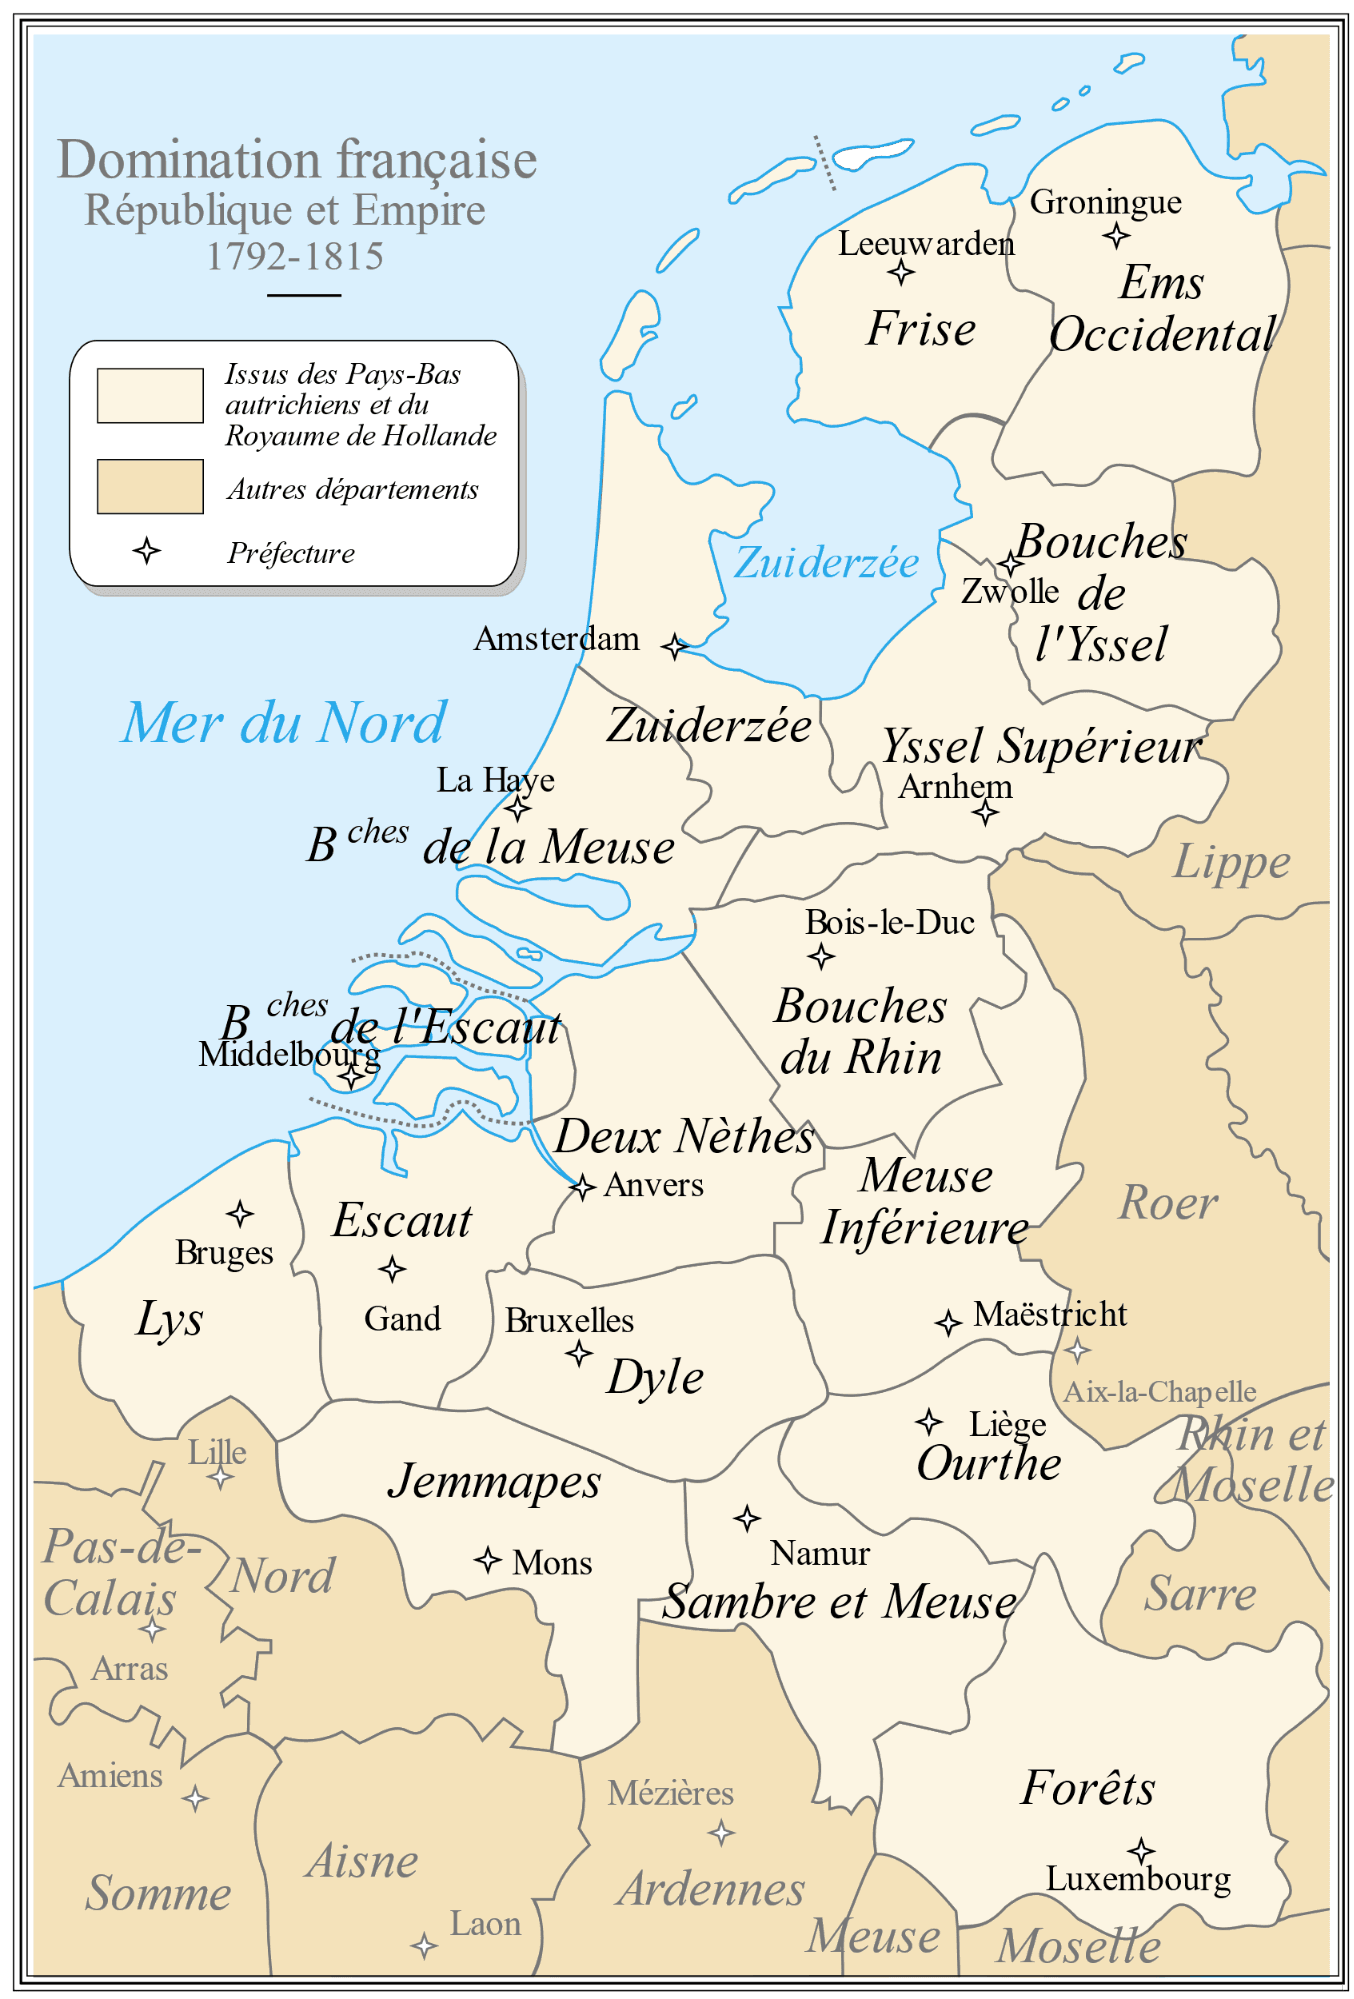 Departments of the French Empire in the North between 1792-1815, source: Wikipedia